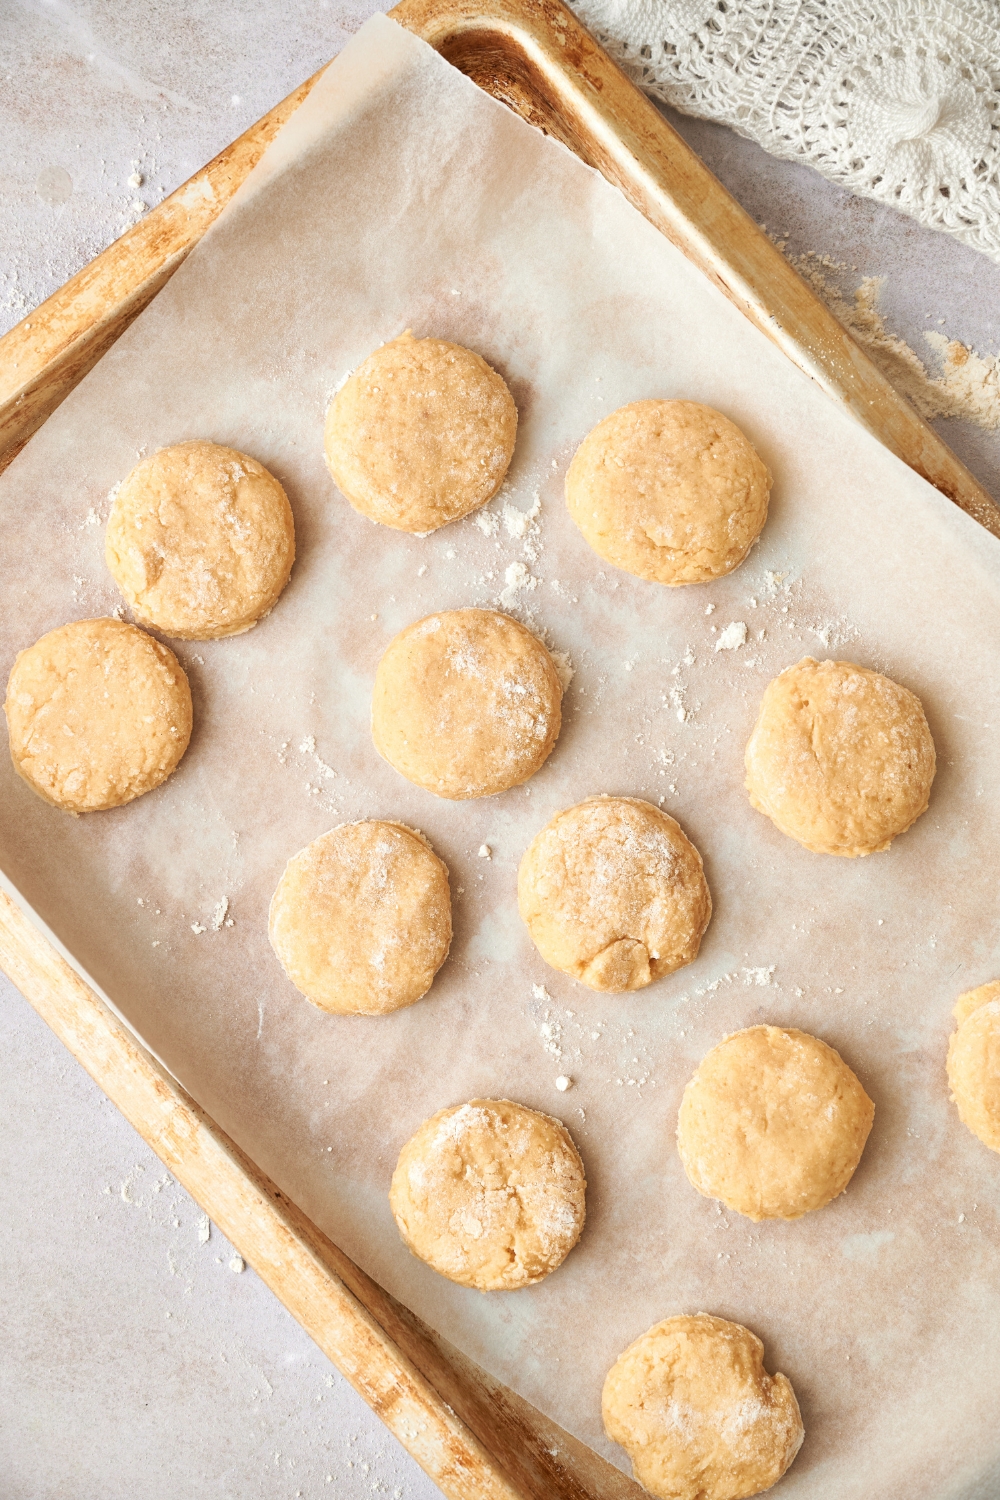 A dozen raw biscuits are on a parchment paper lined baking sheet.